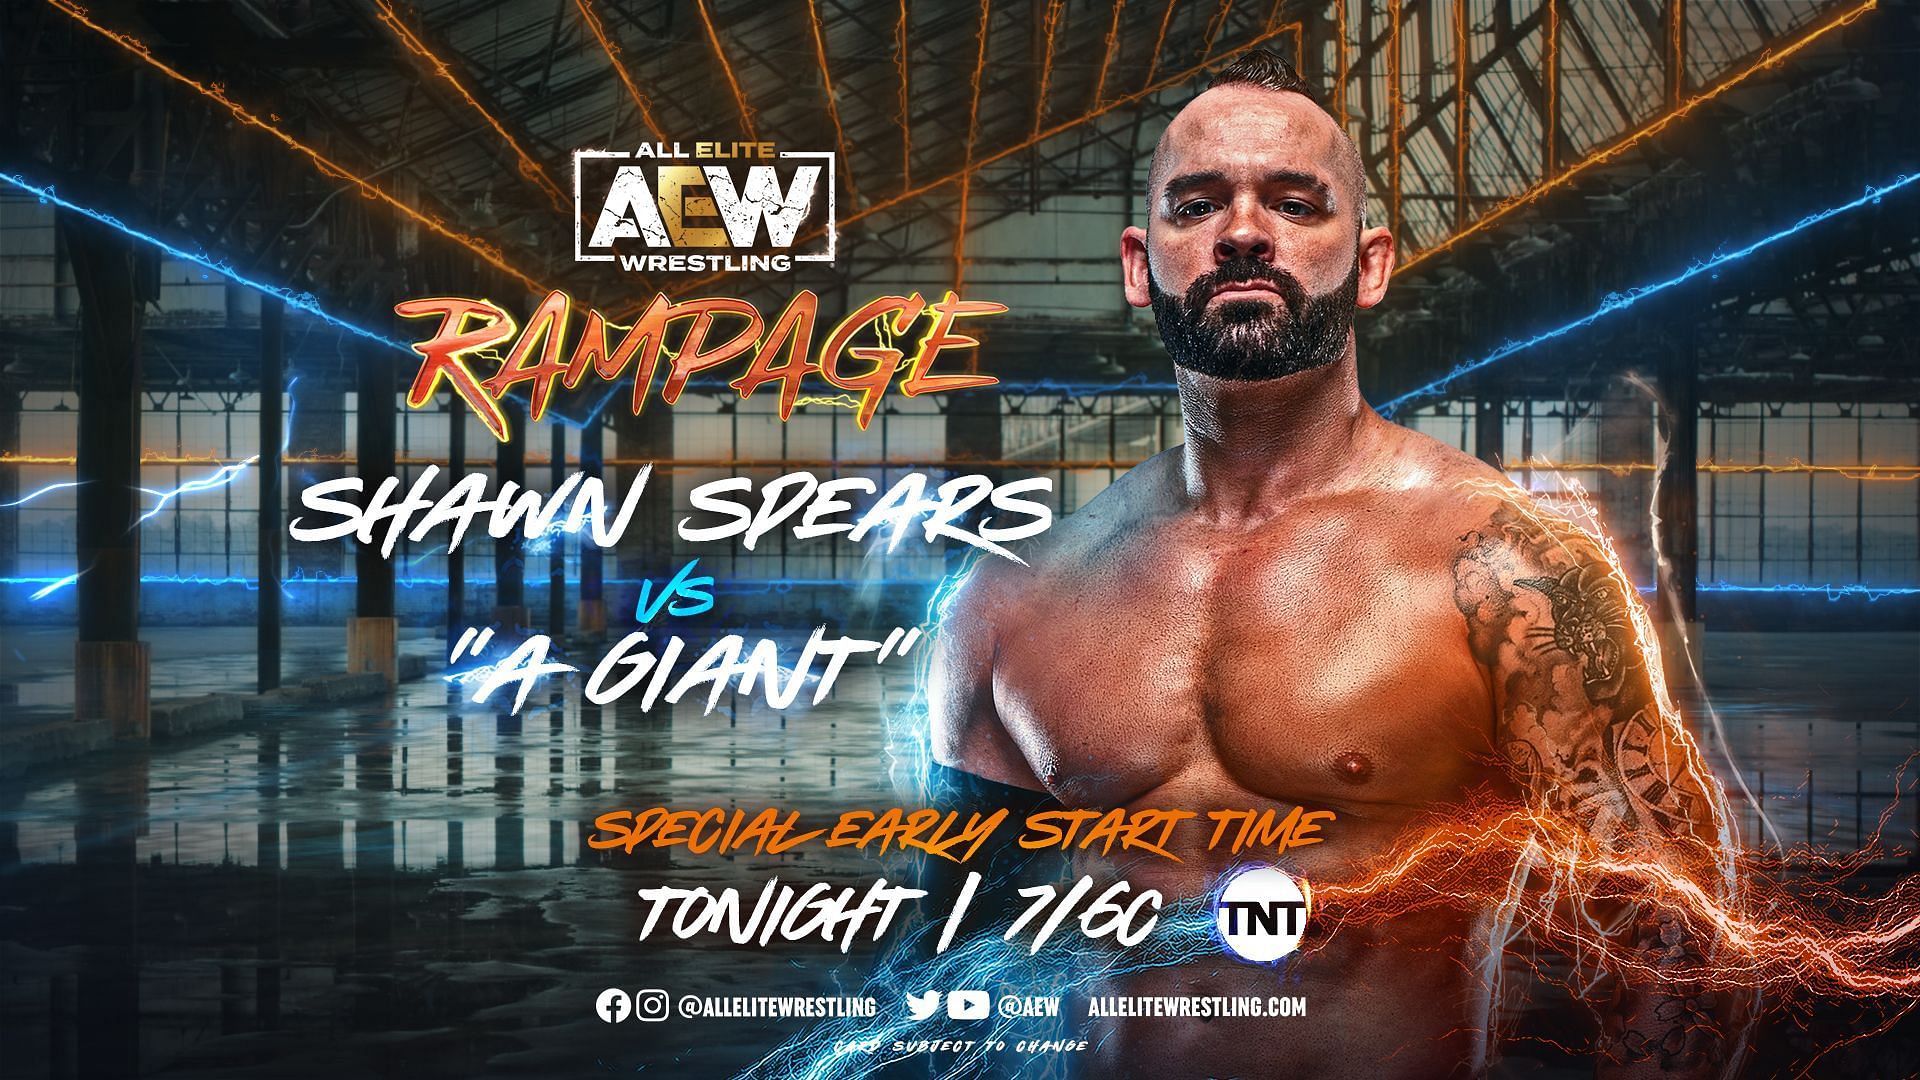 Shawn Spears was billed against &quot;a giant&quot; heading into AEW Rampage